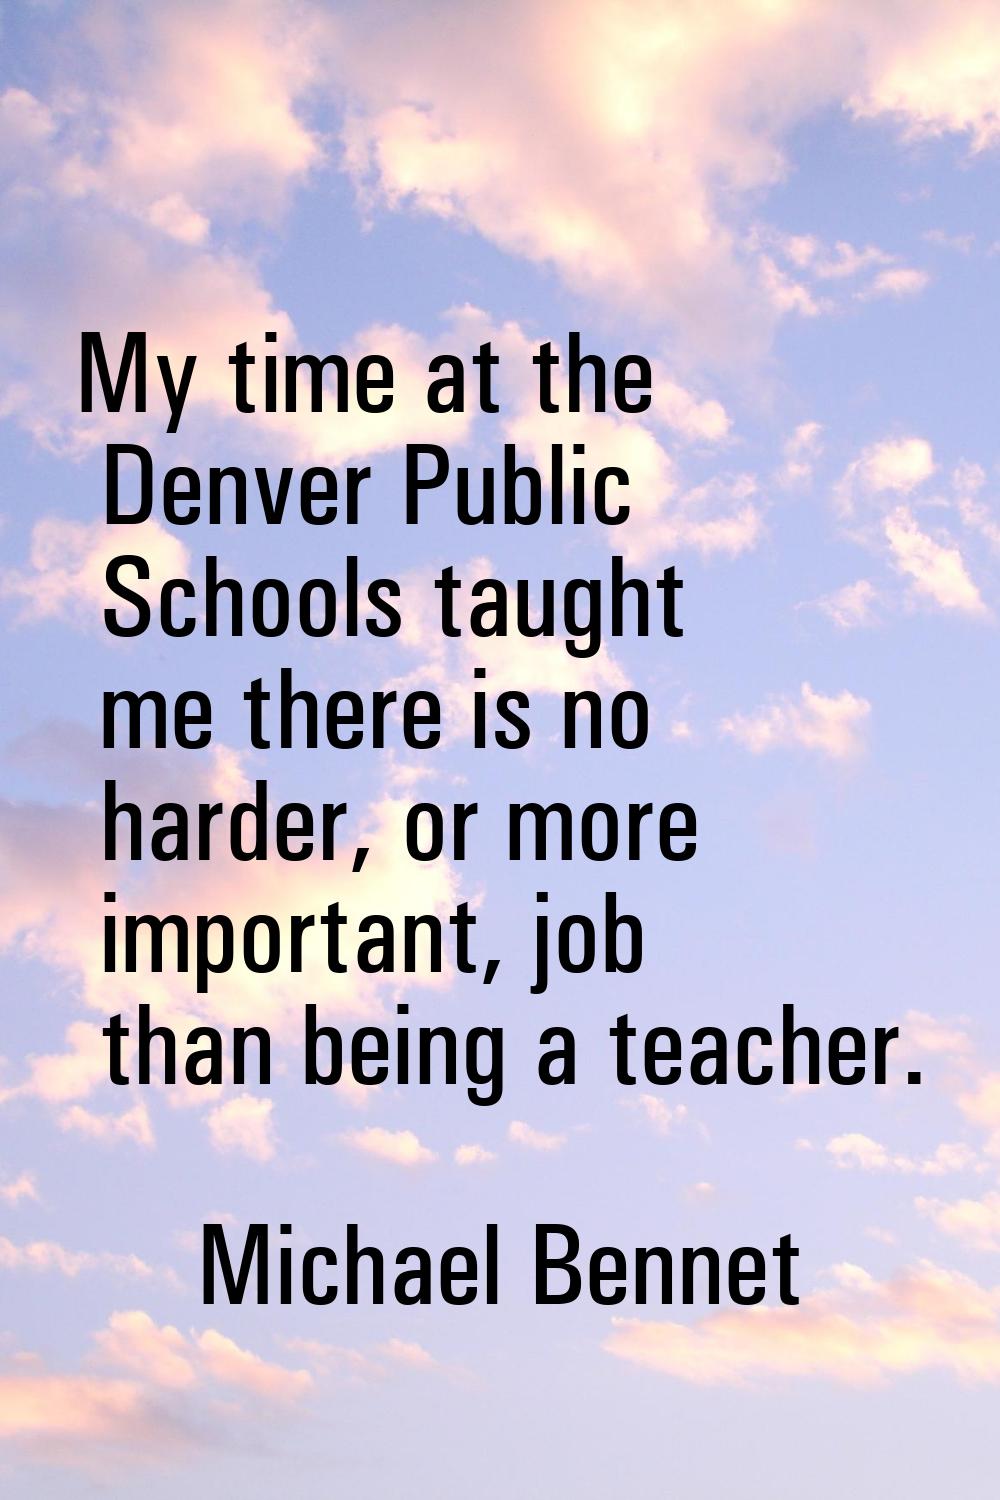 My time at the Denver Public Schools taught me there is no harder, or more important, job than bein